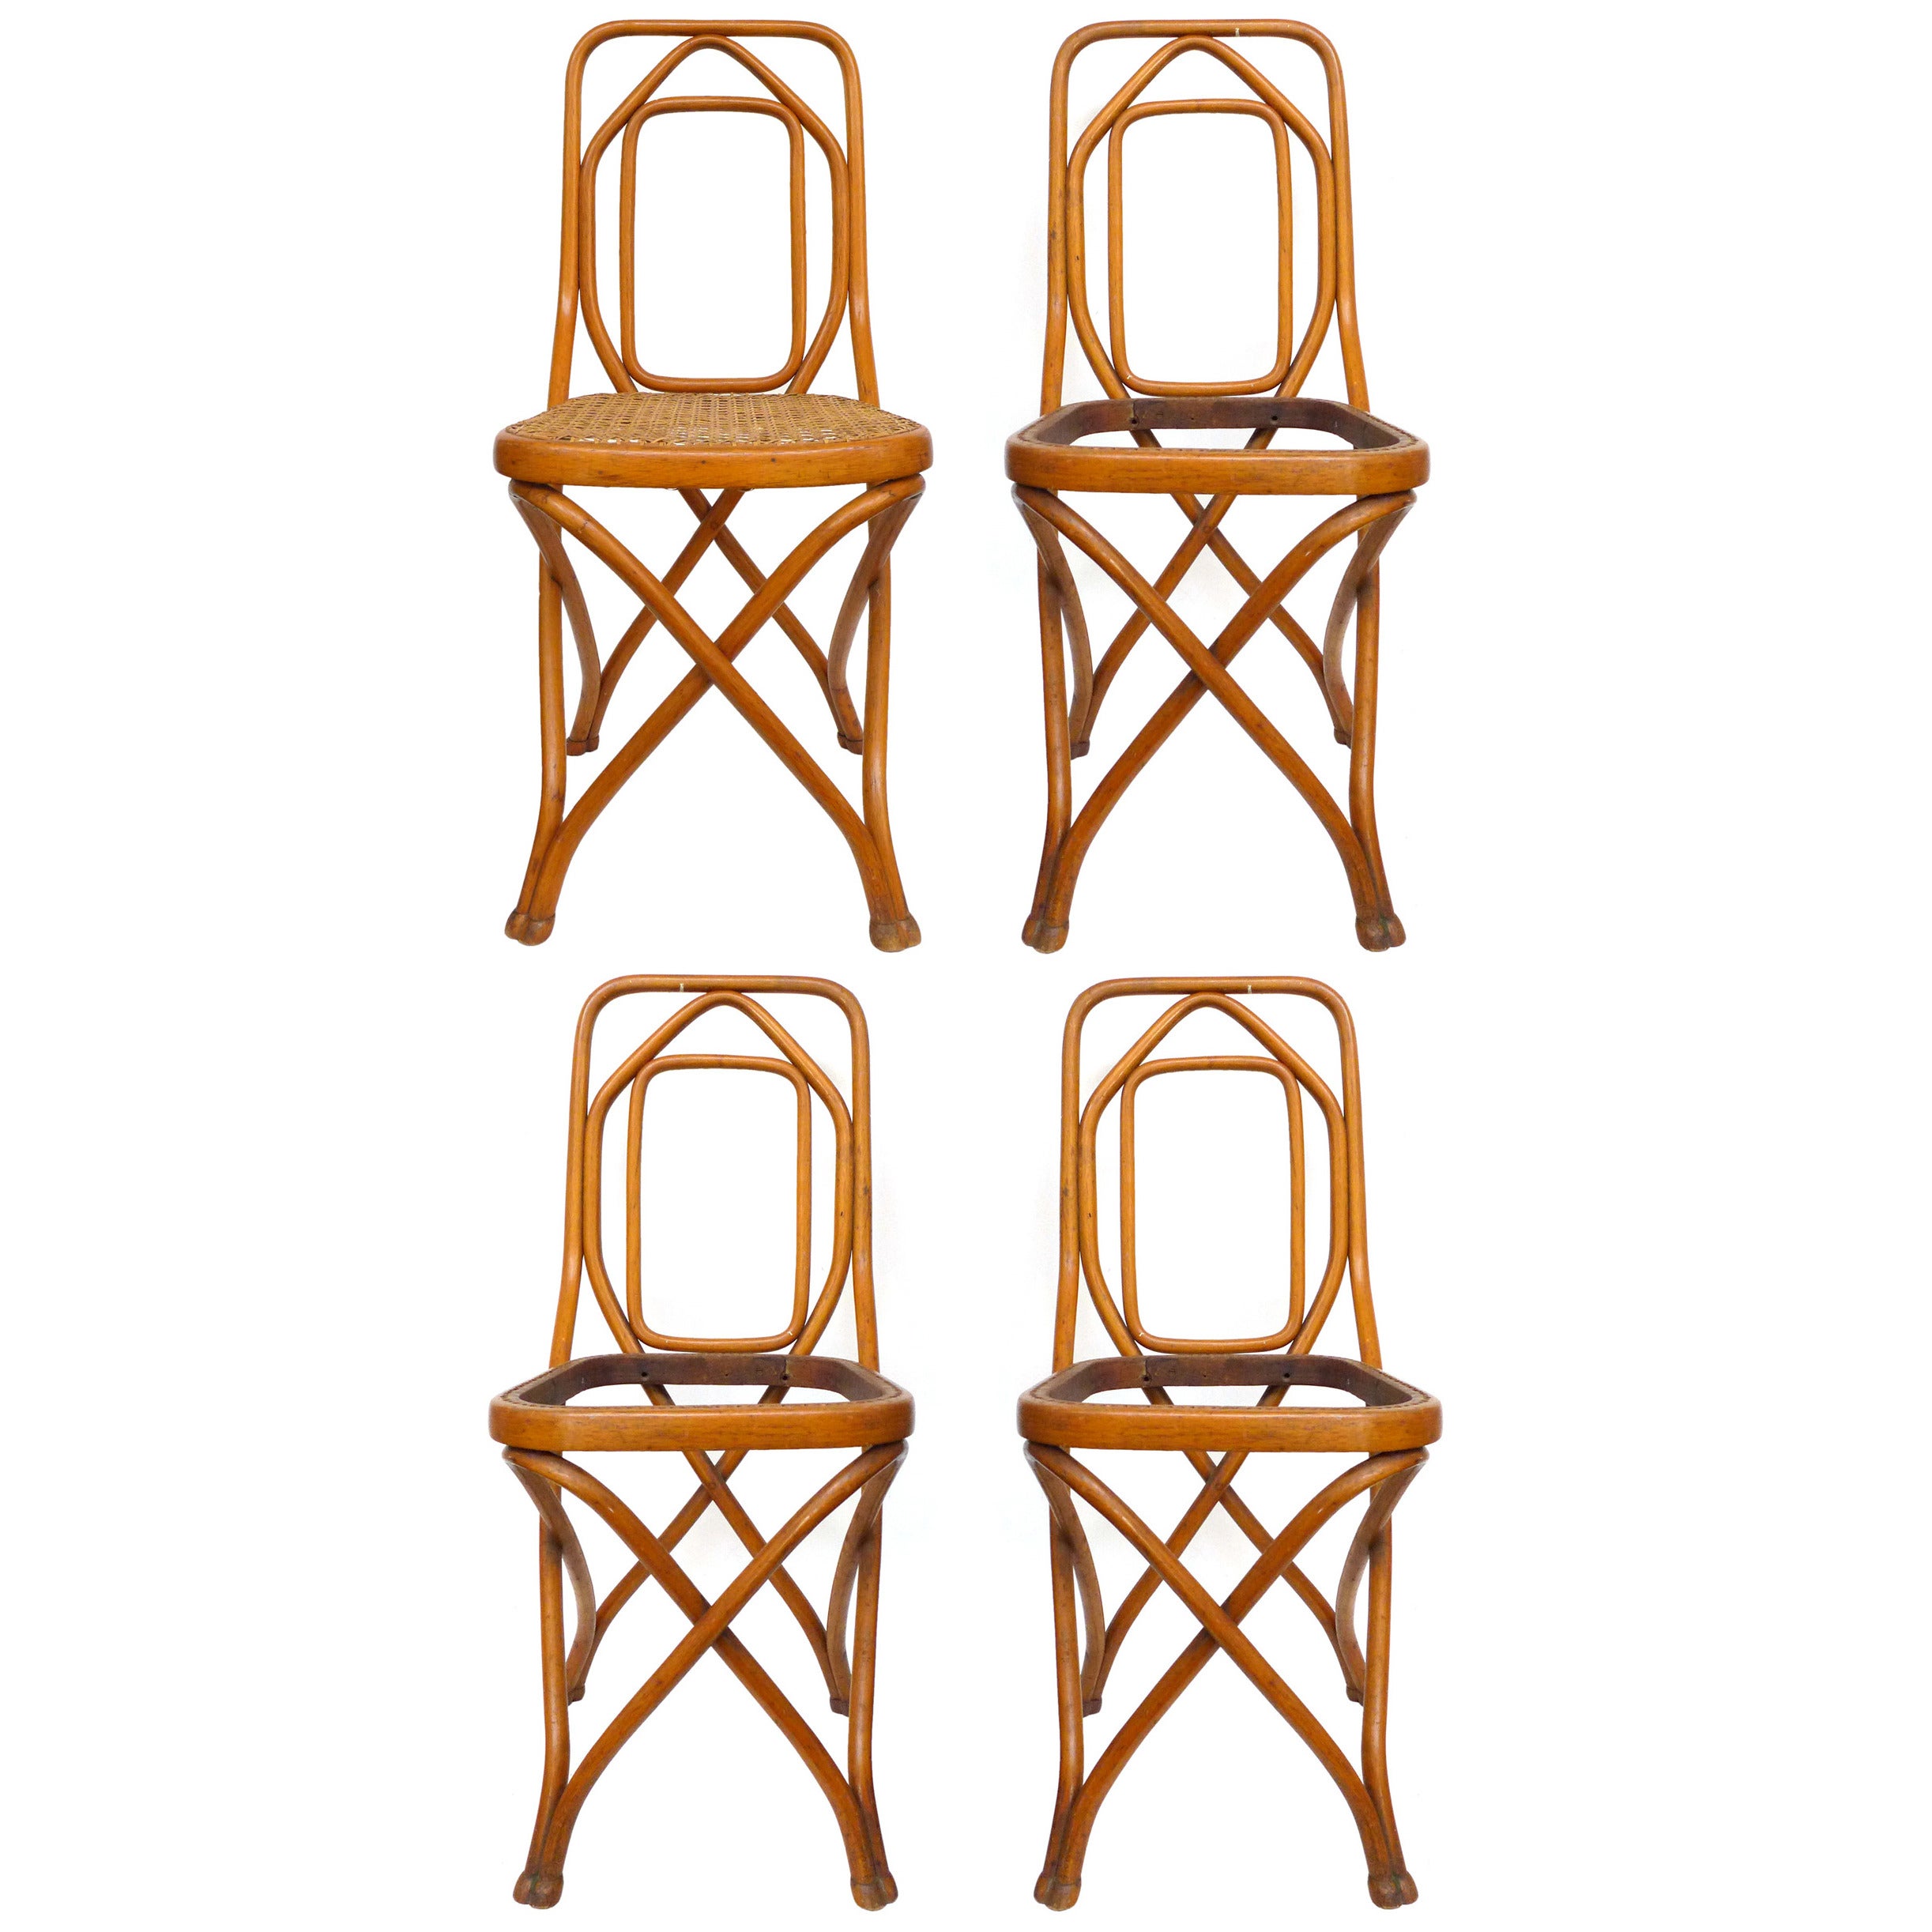 Set of 4 Bentwood & Cane Chairs by Thonet